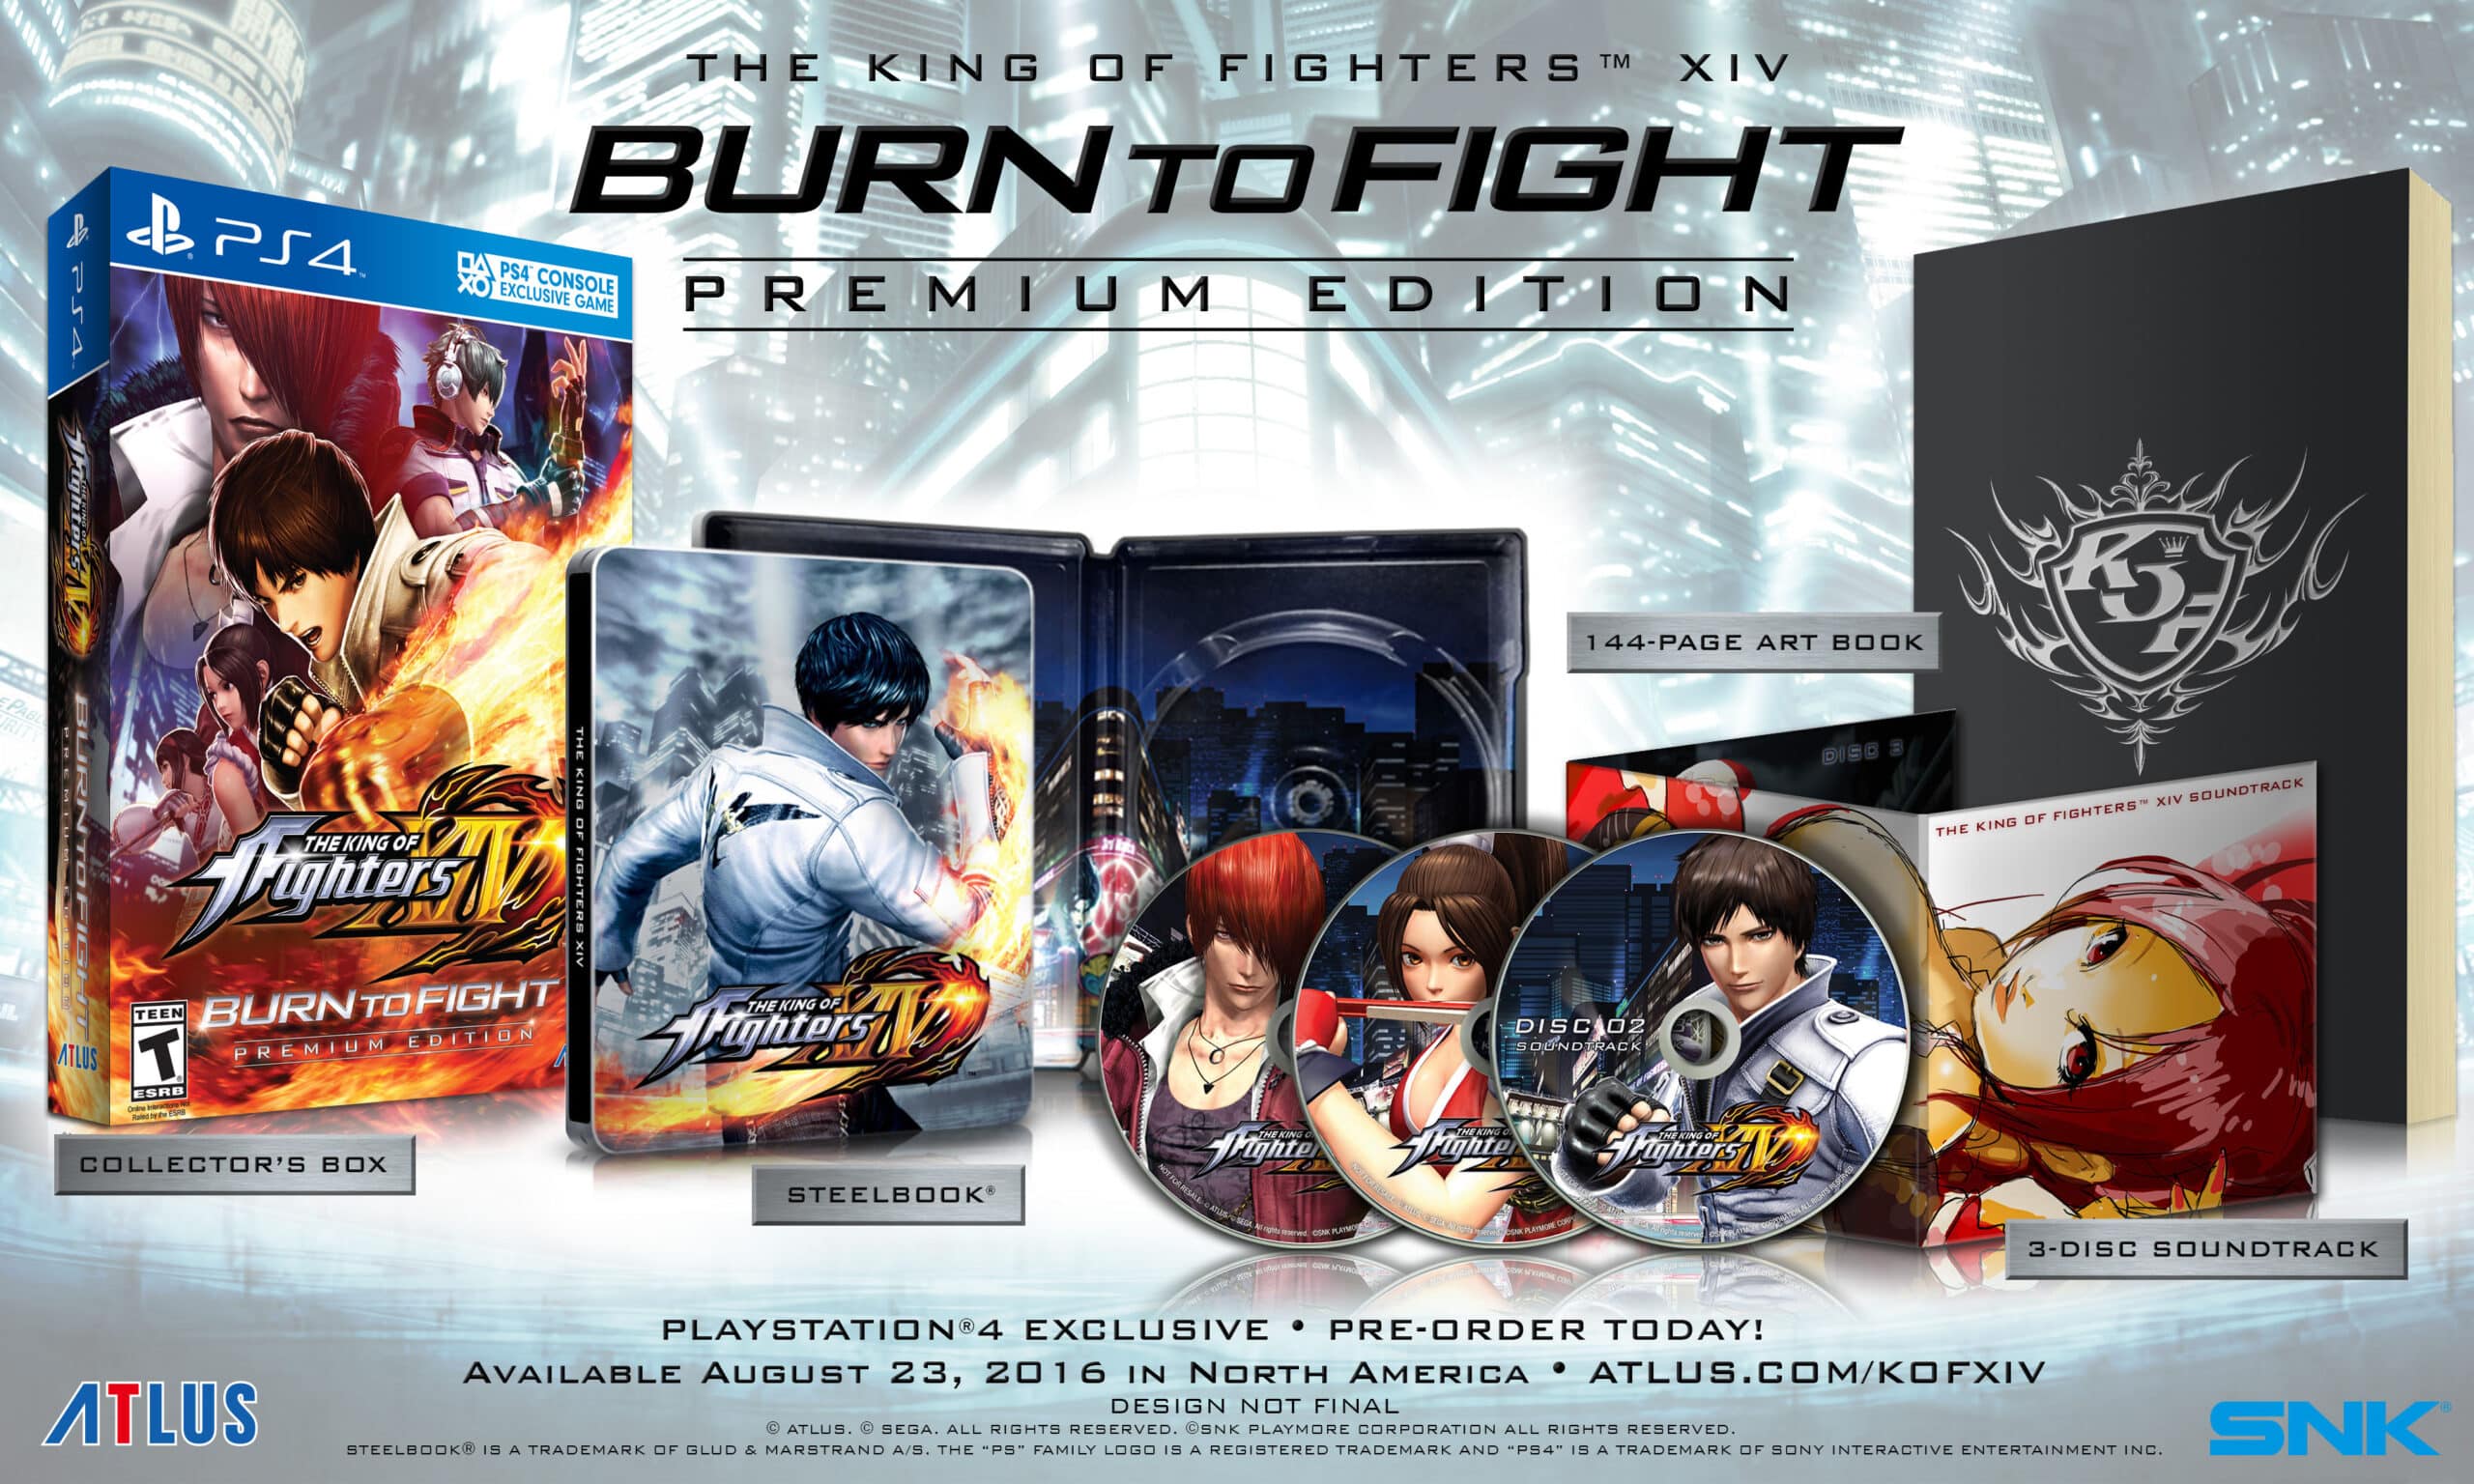 The King of Fighters XIV Premium Edition